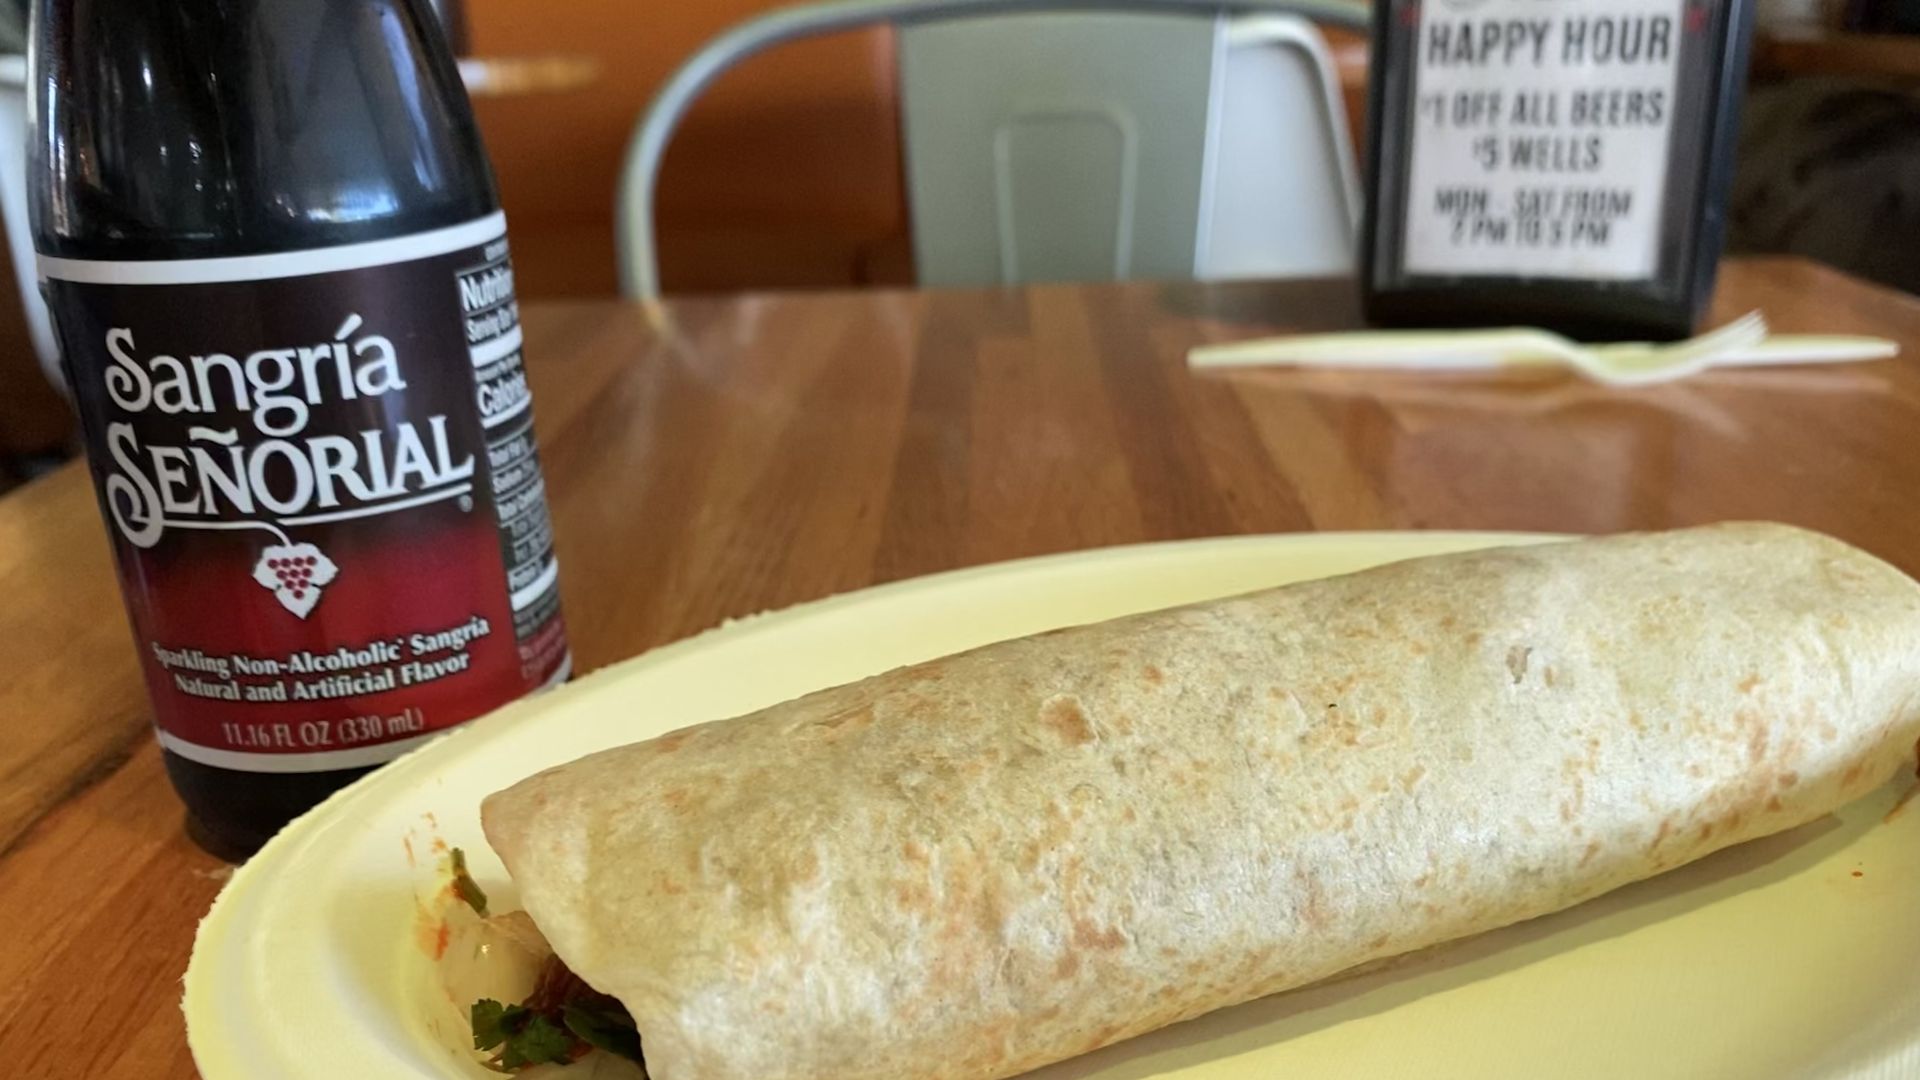 A burrito on a paper plate with shredded beef coming out of the end next to a glass soft drink bottle.